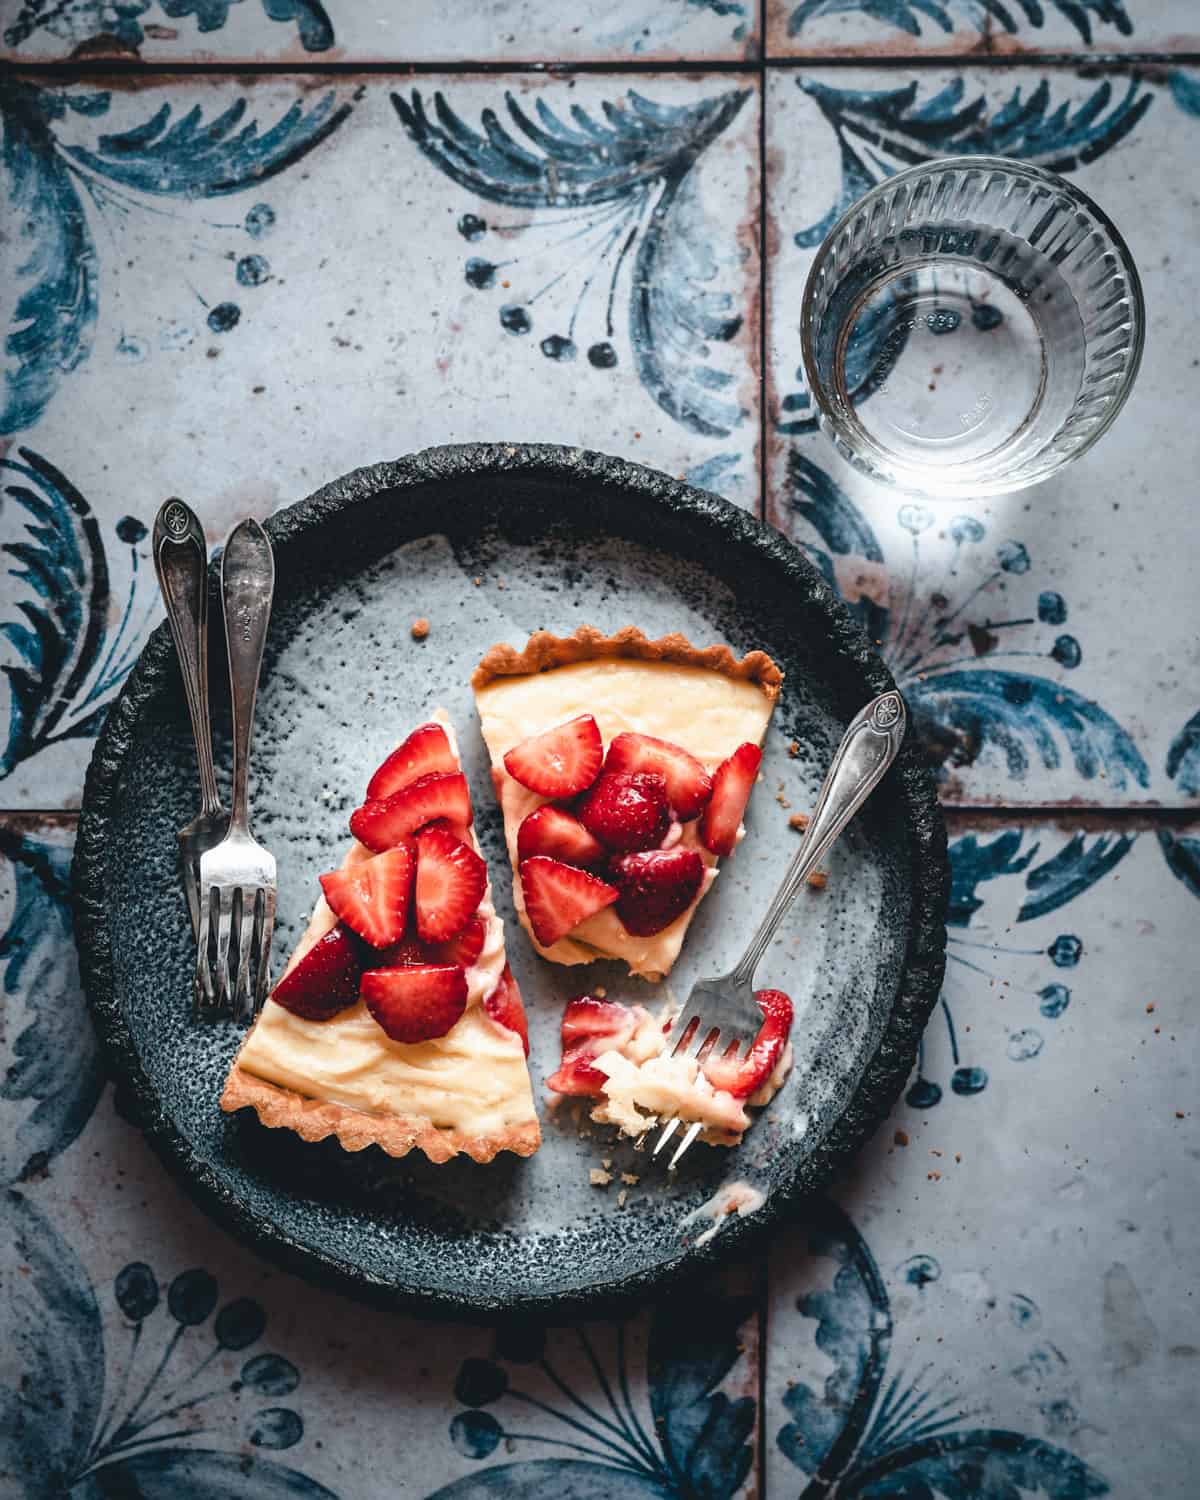 Two slices of Tarte aux Fraises on a plate with forks and glass of water.